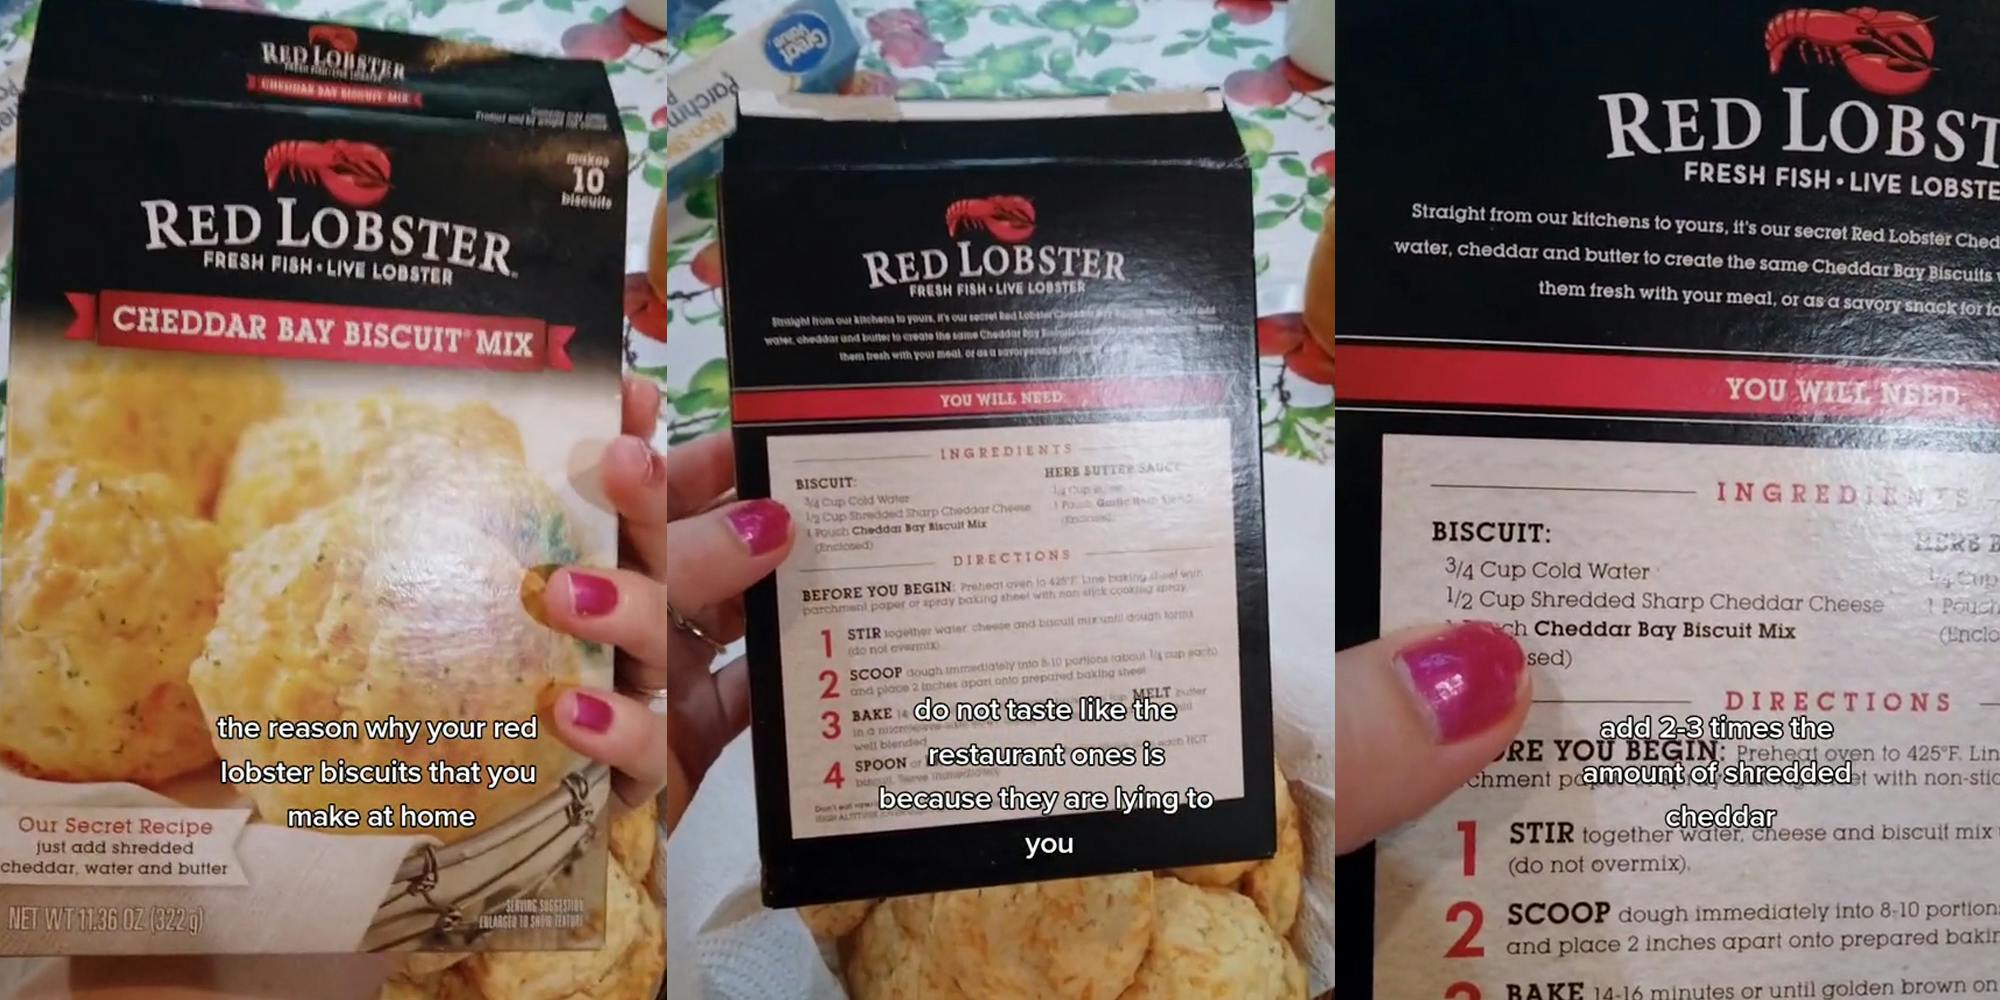 Red Lobster Cheddar Bay Biscuit Mix packaging with caption "the reason why your red lobster biscuits that you make at home" (l) Red Lobster Cheddar Bay Biscuit Mix packaging with caption "do not taste like the restaurant ones is because they are lying to you" (c) Red Lobster Cheddar Bay Biscuit Mix packaging with caption "ad 2-3 times the amount of shredded cheddar" (r)